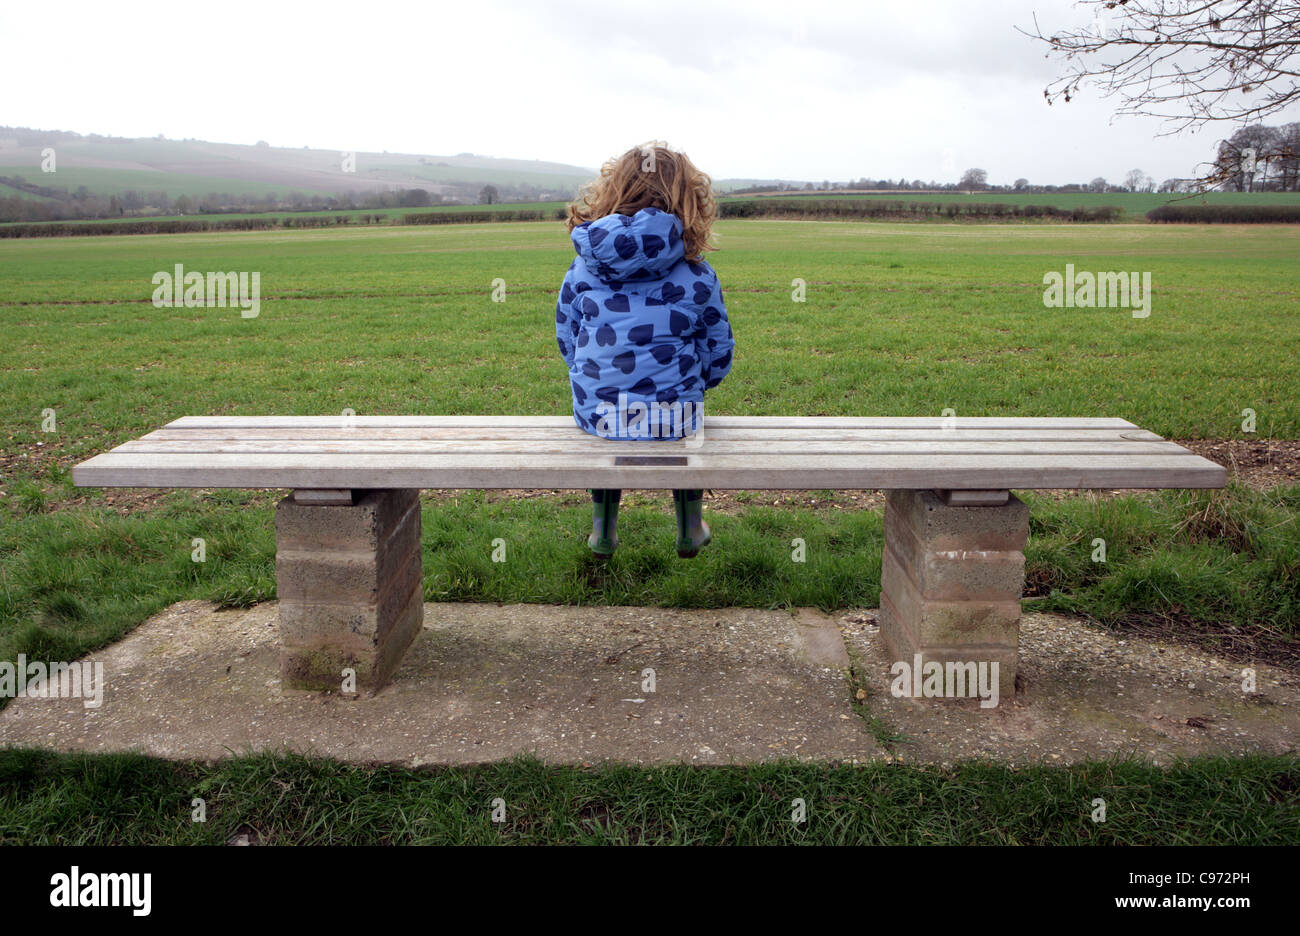 Child alone with thoughts on seat in the Countryside in England. Stock Photo